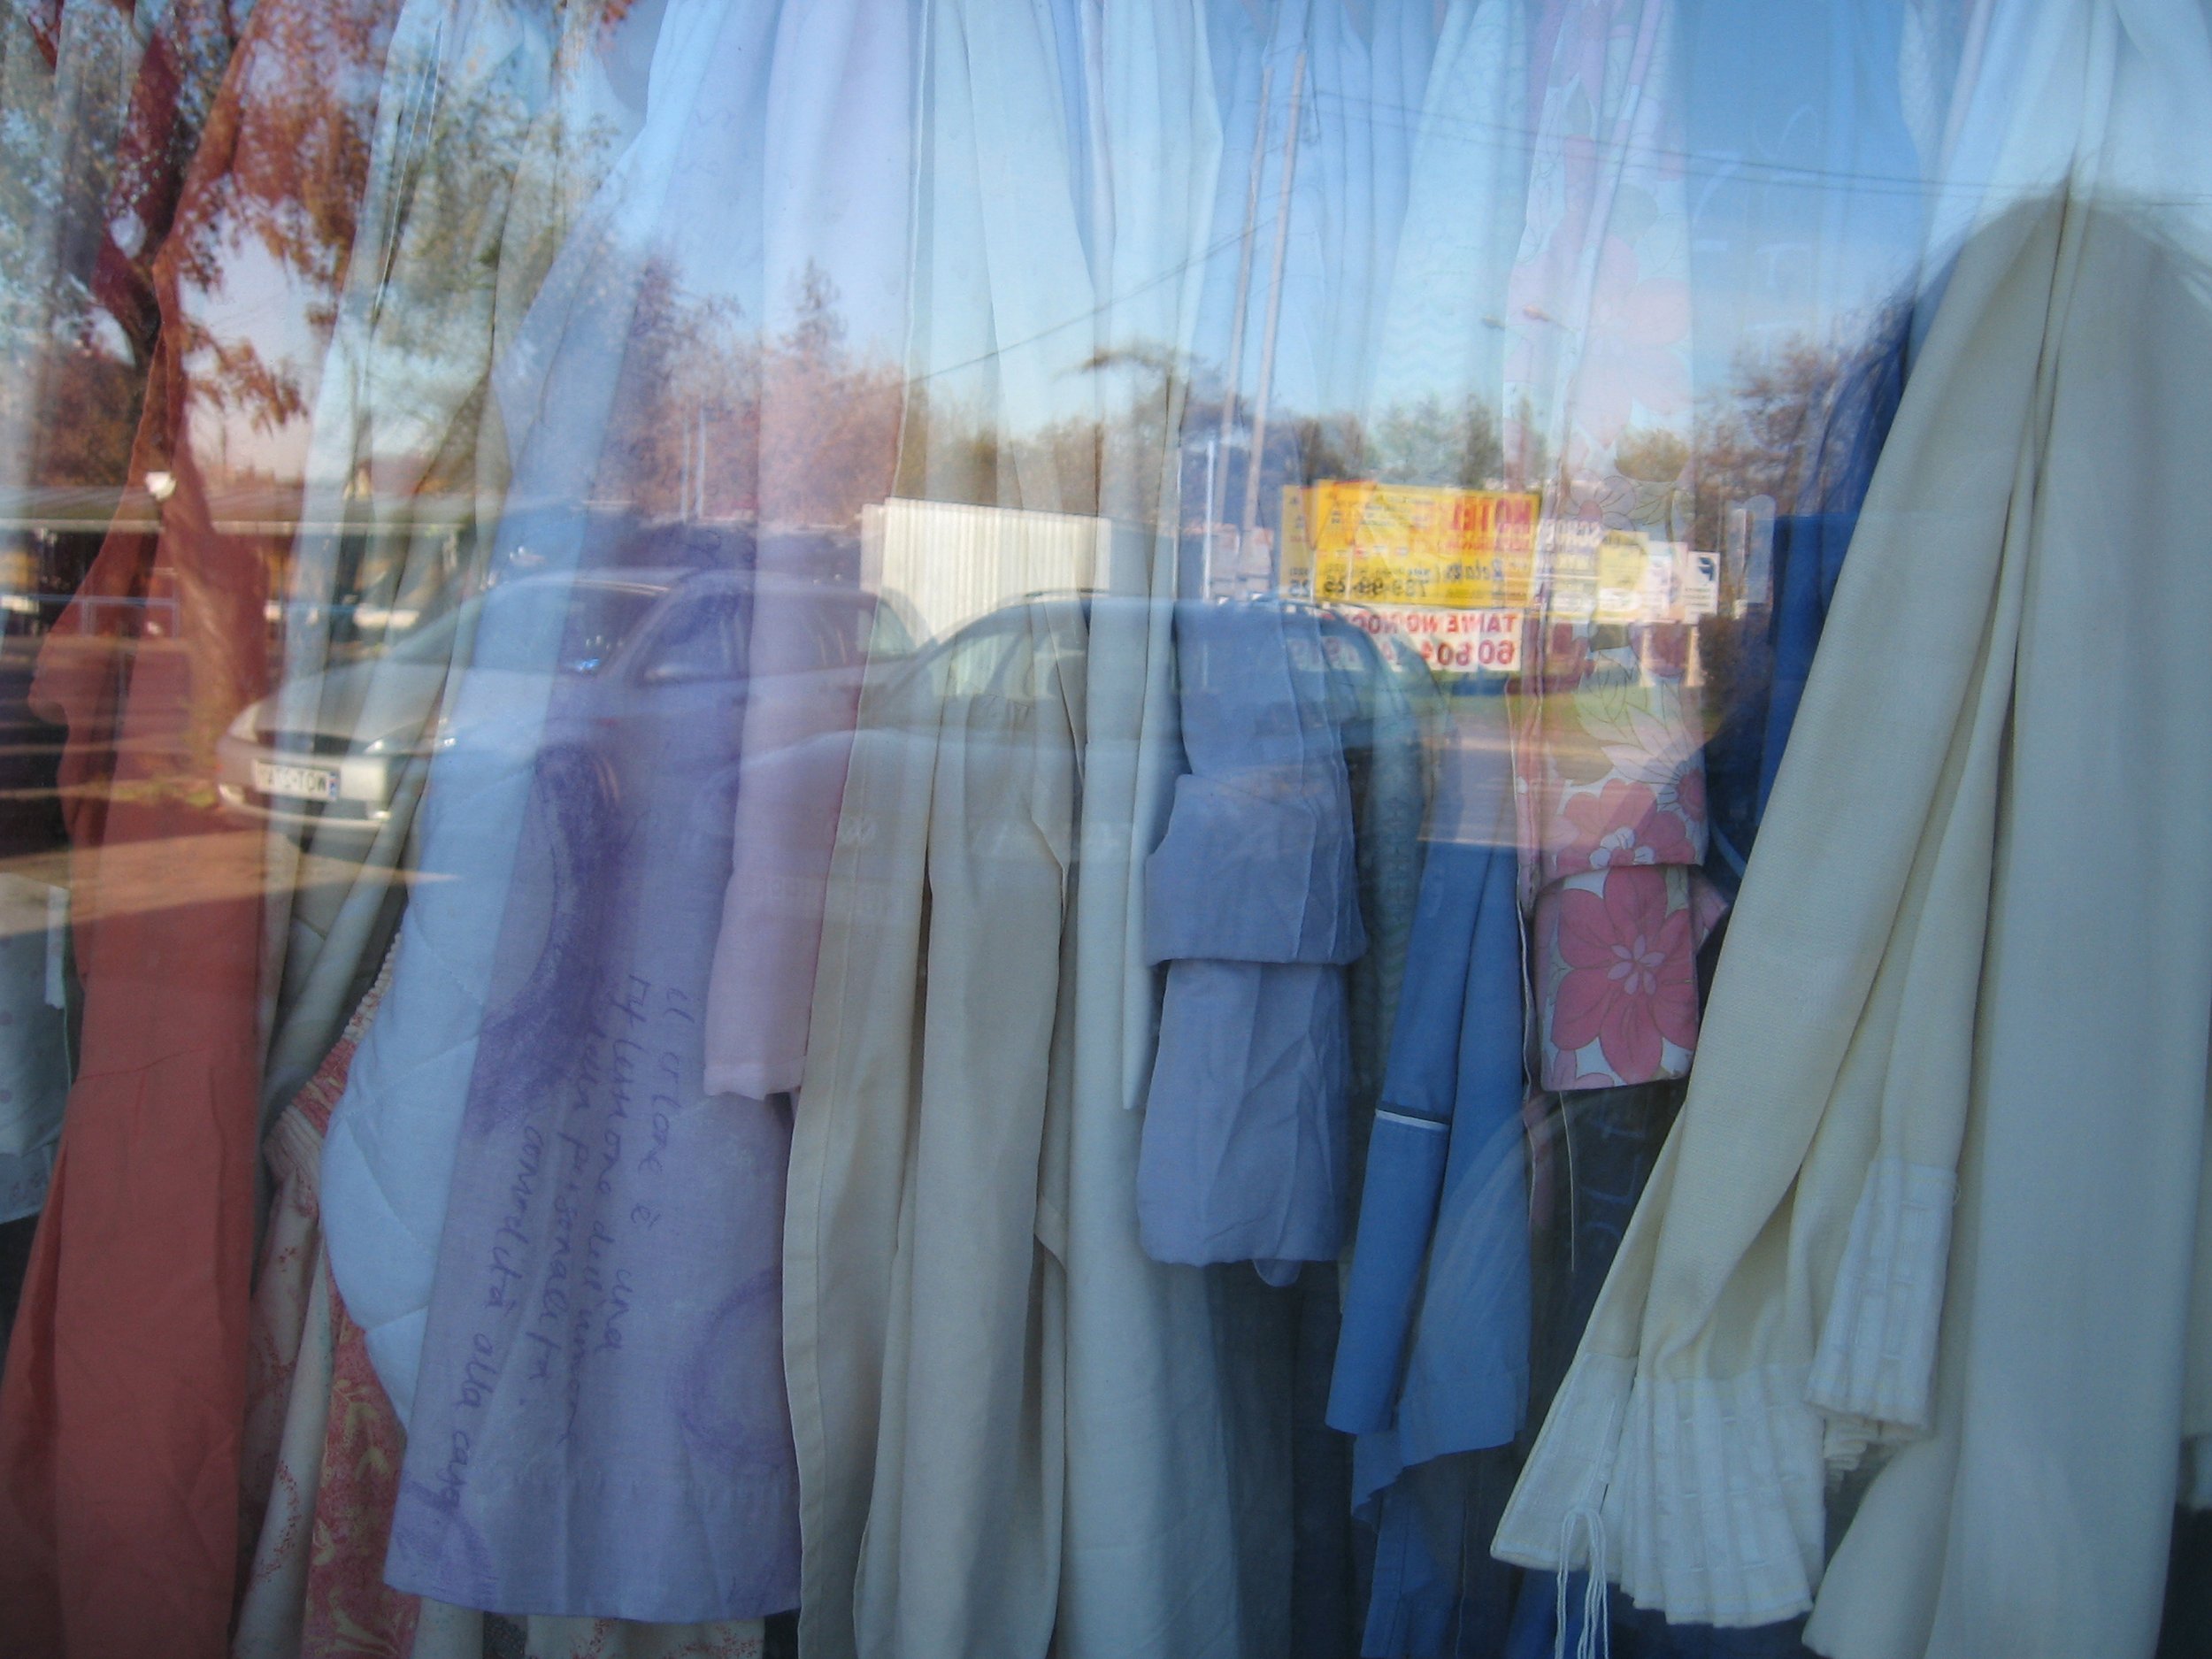 Second hand store - lots of duvet covers/curtains in the window